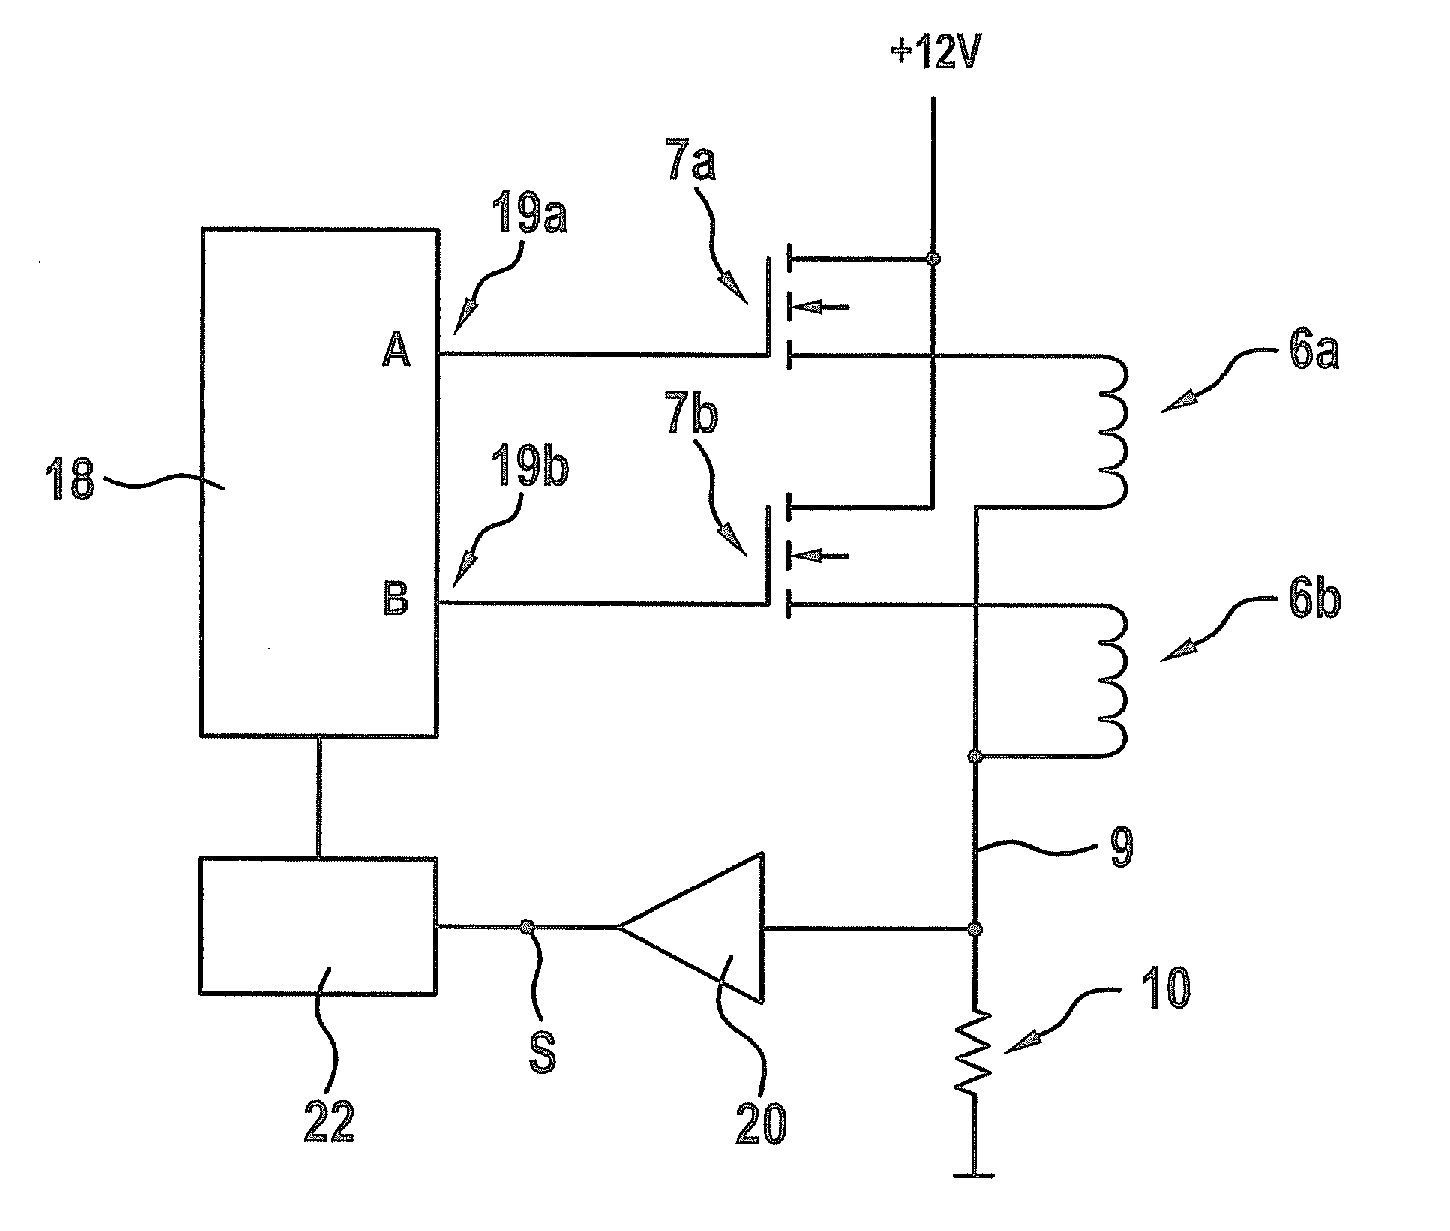 Method and device for testing solenoid valves